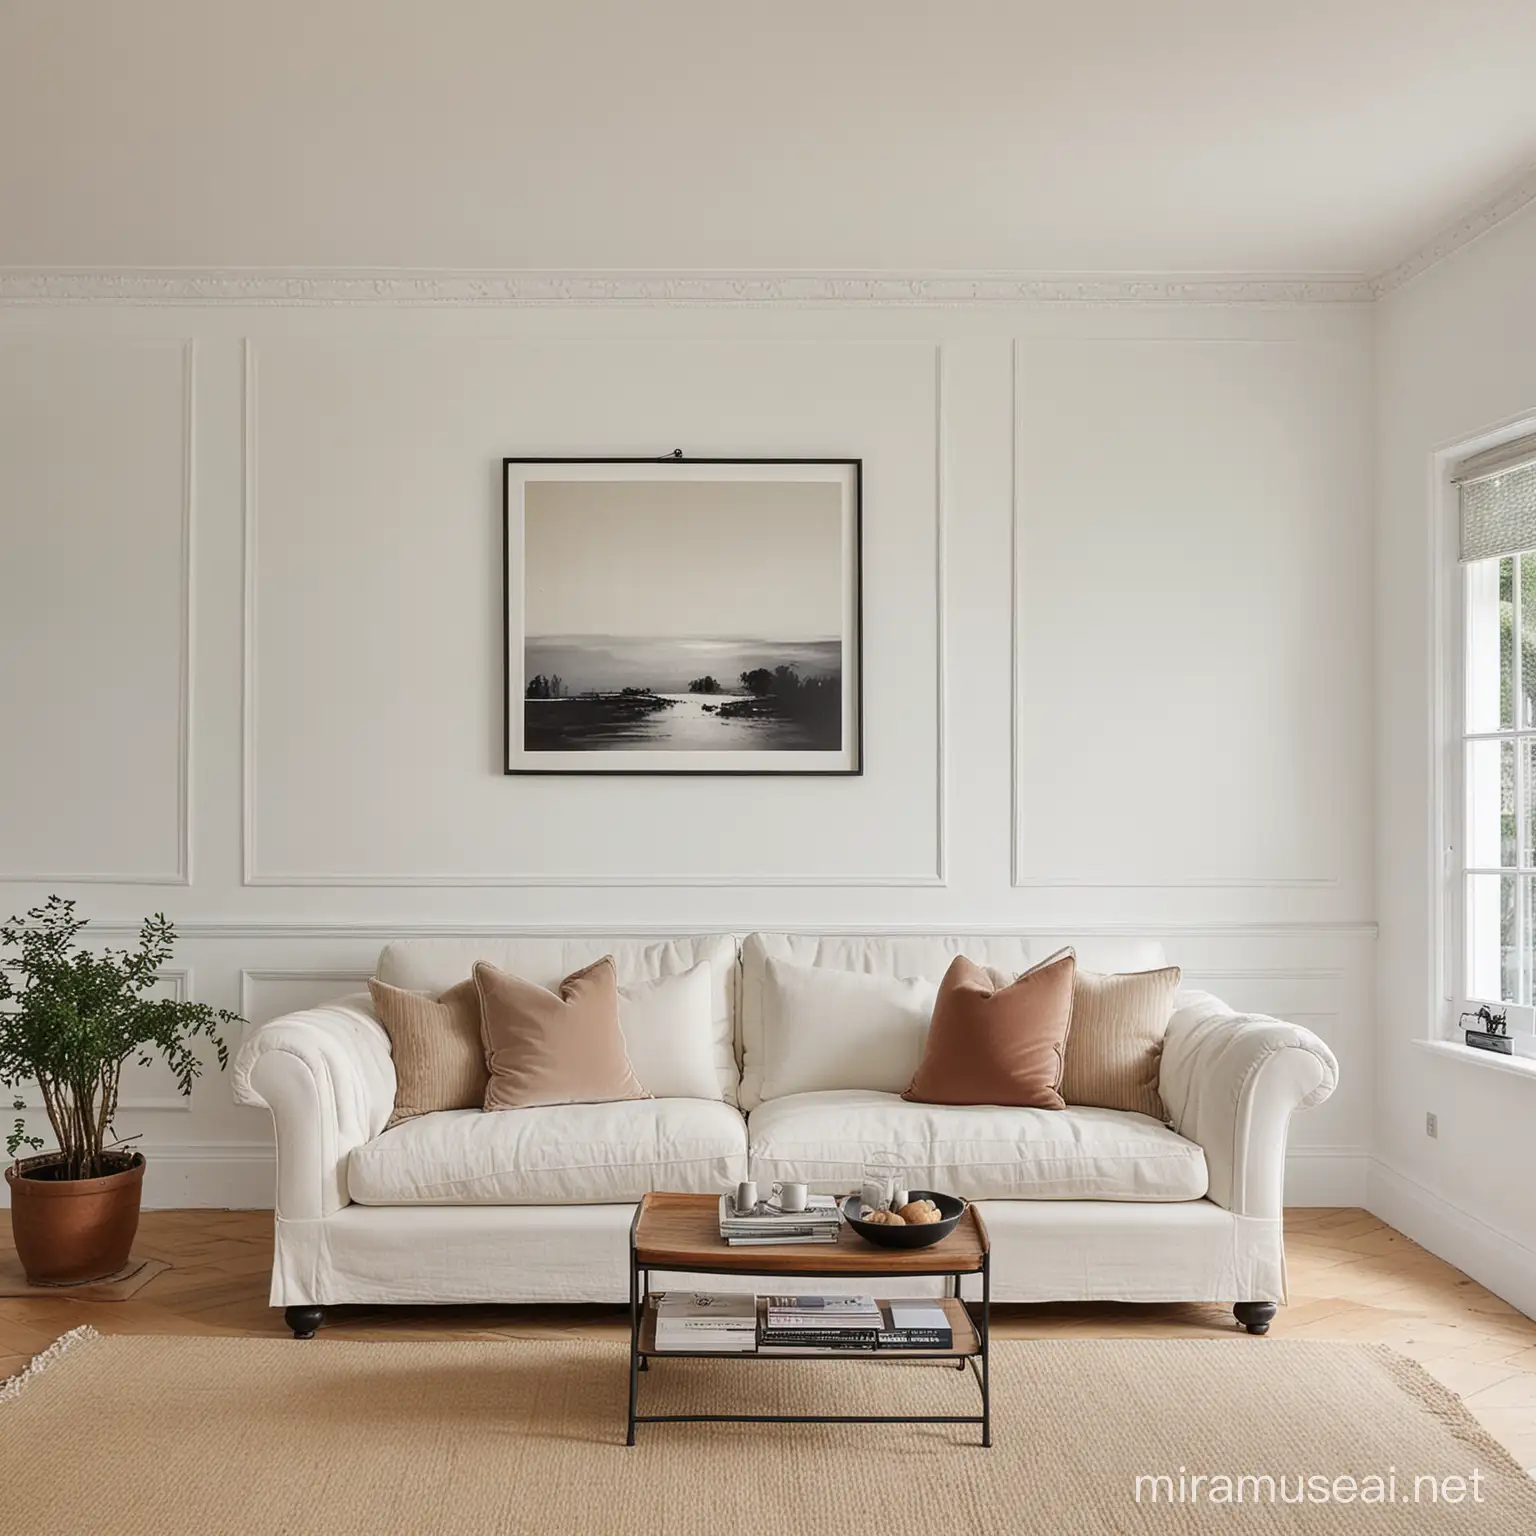 Minimalist Living Room with Sofa and White Paneled Walls